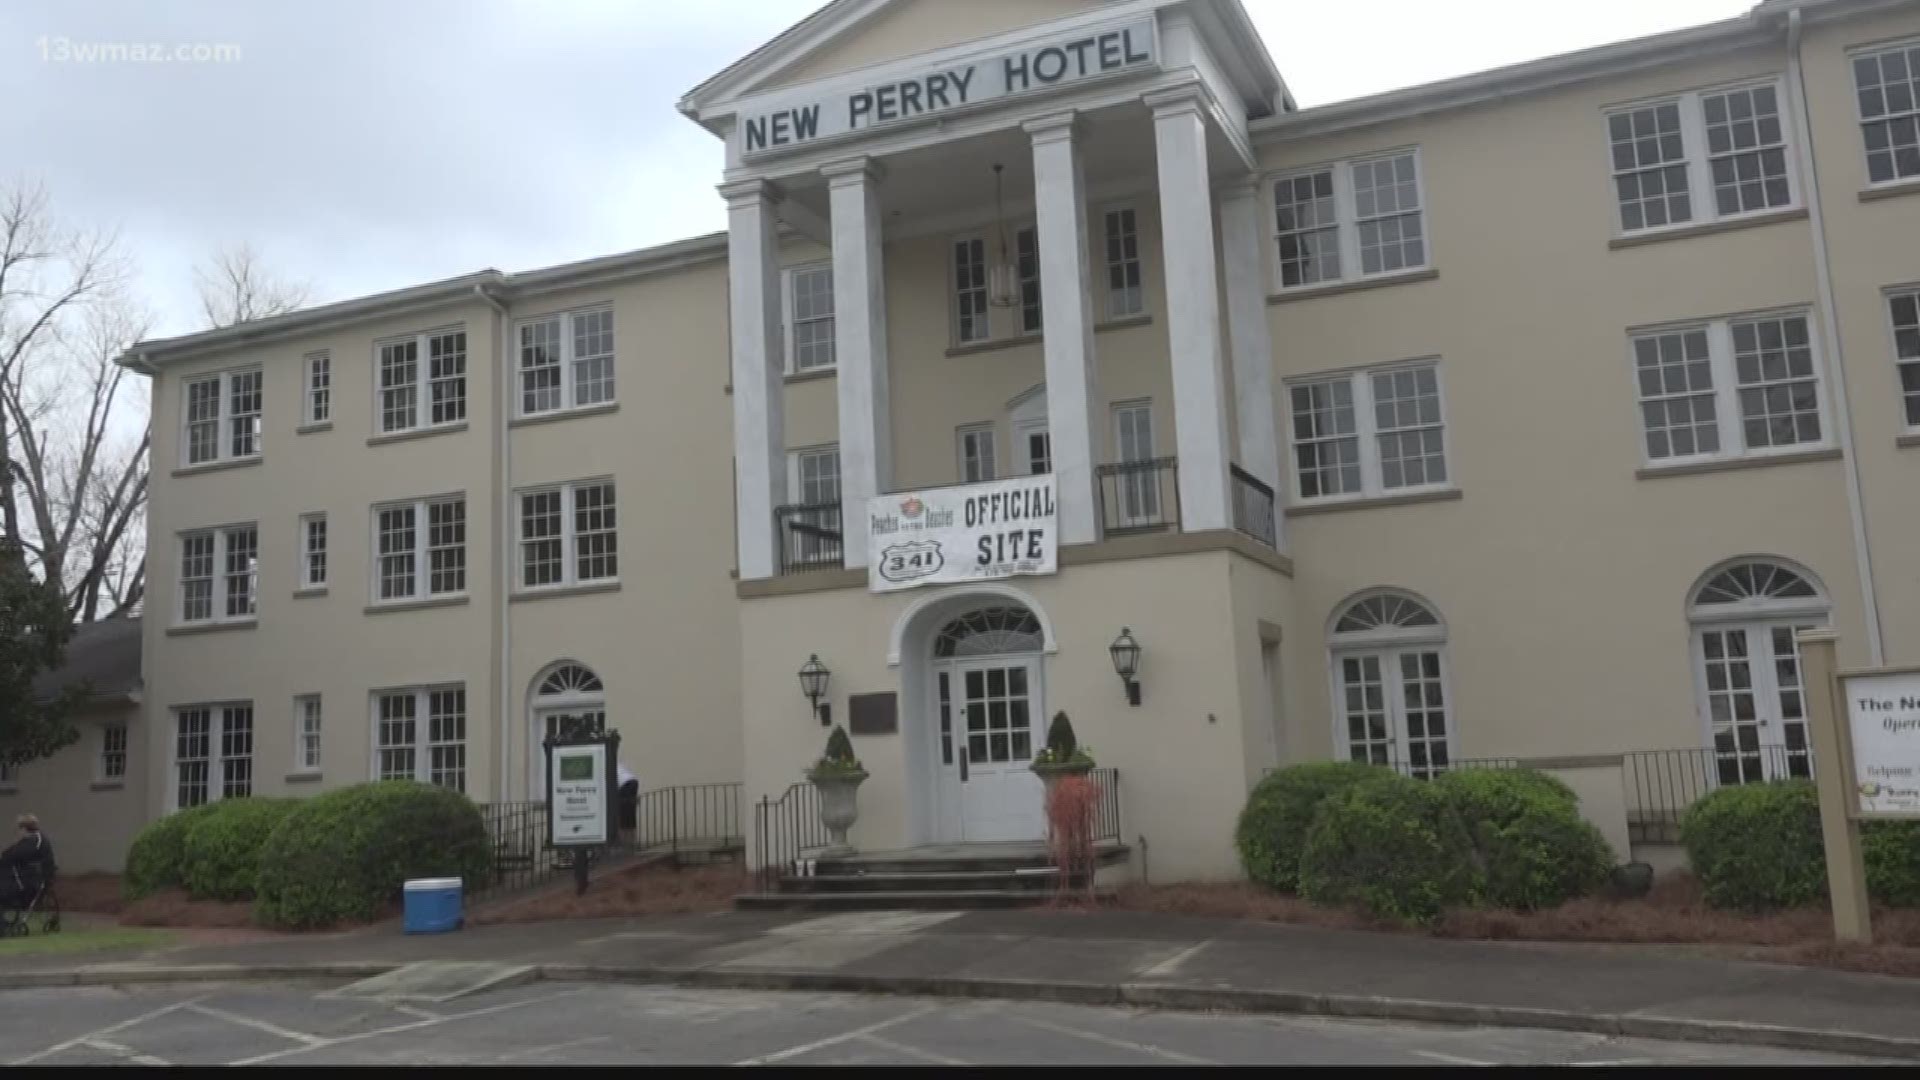 The New Perry Hotel was purchased by the HALO Group last fall, and now they're almost ready to begin renovations. Here's an inside look of the building before those take place.